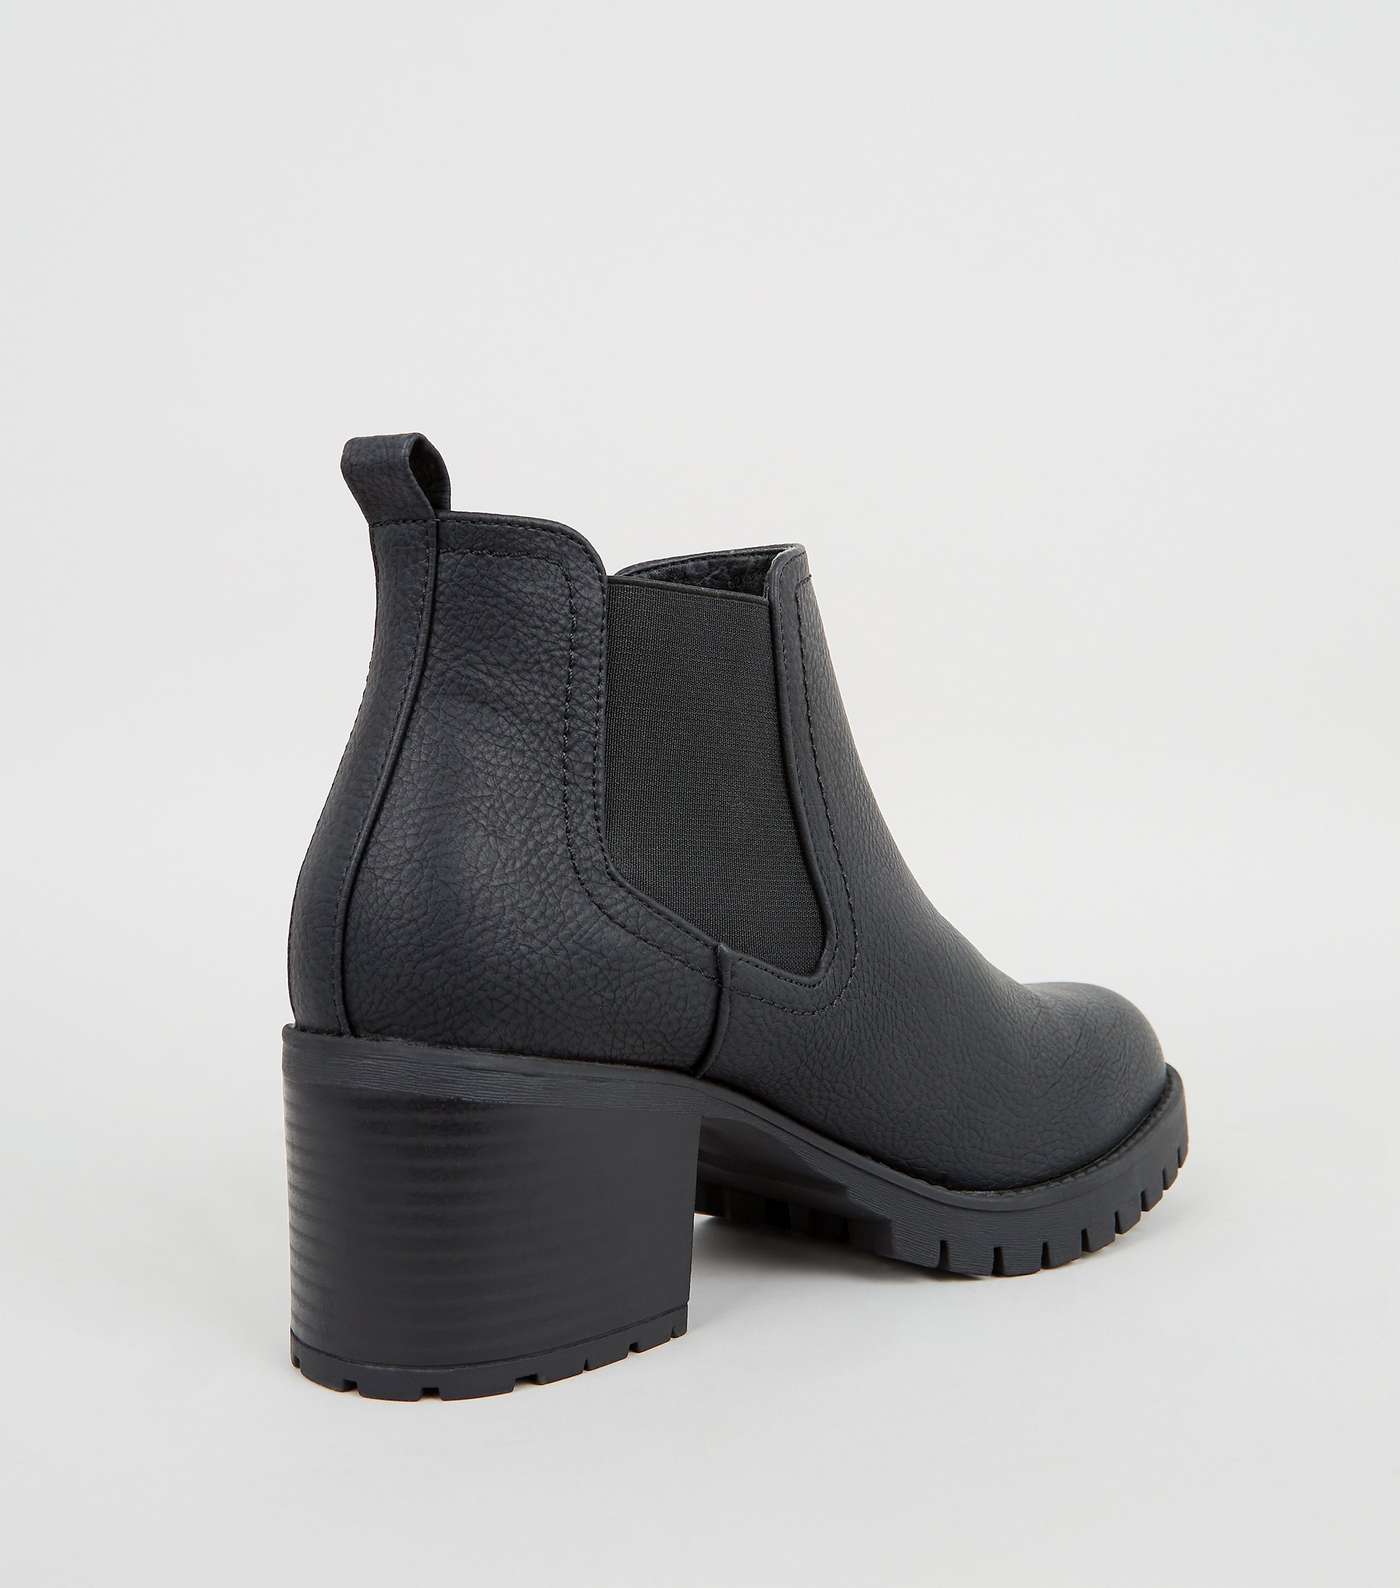 Black Leather-Look Cleated Chelsea Boots Image 4